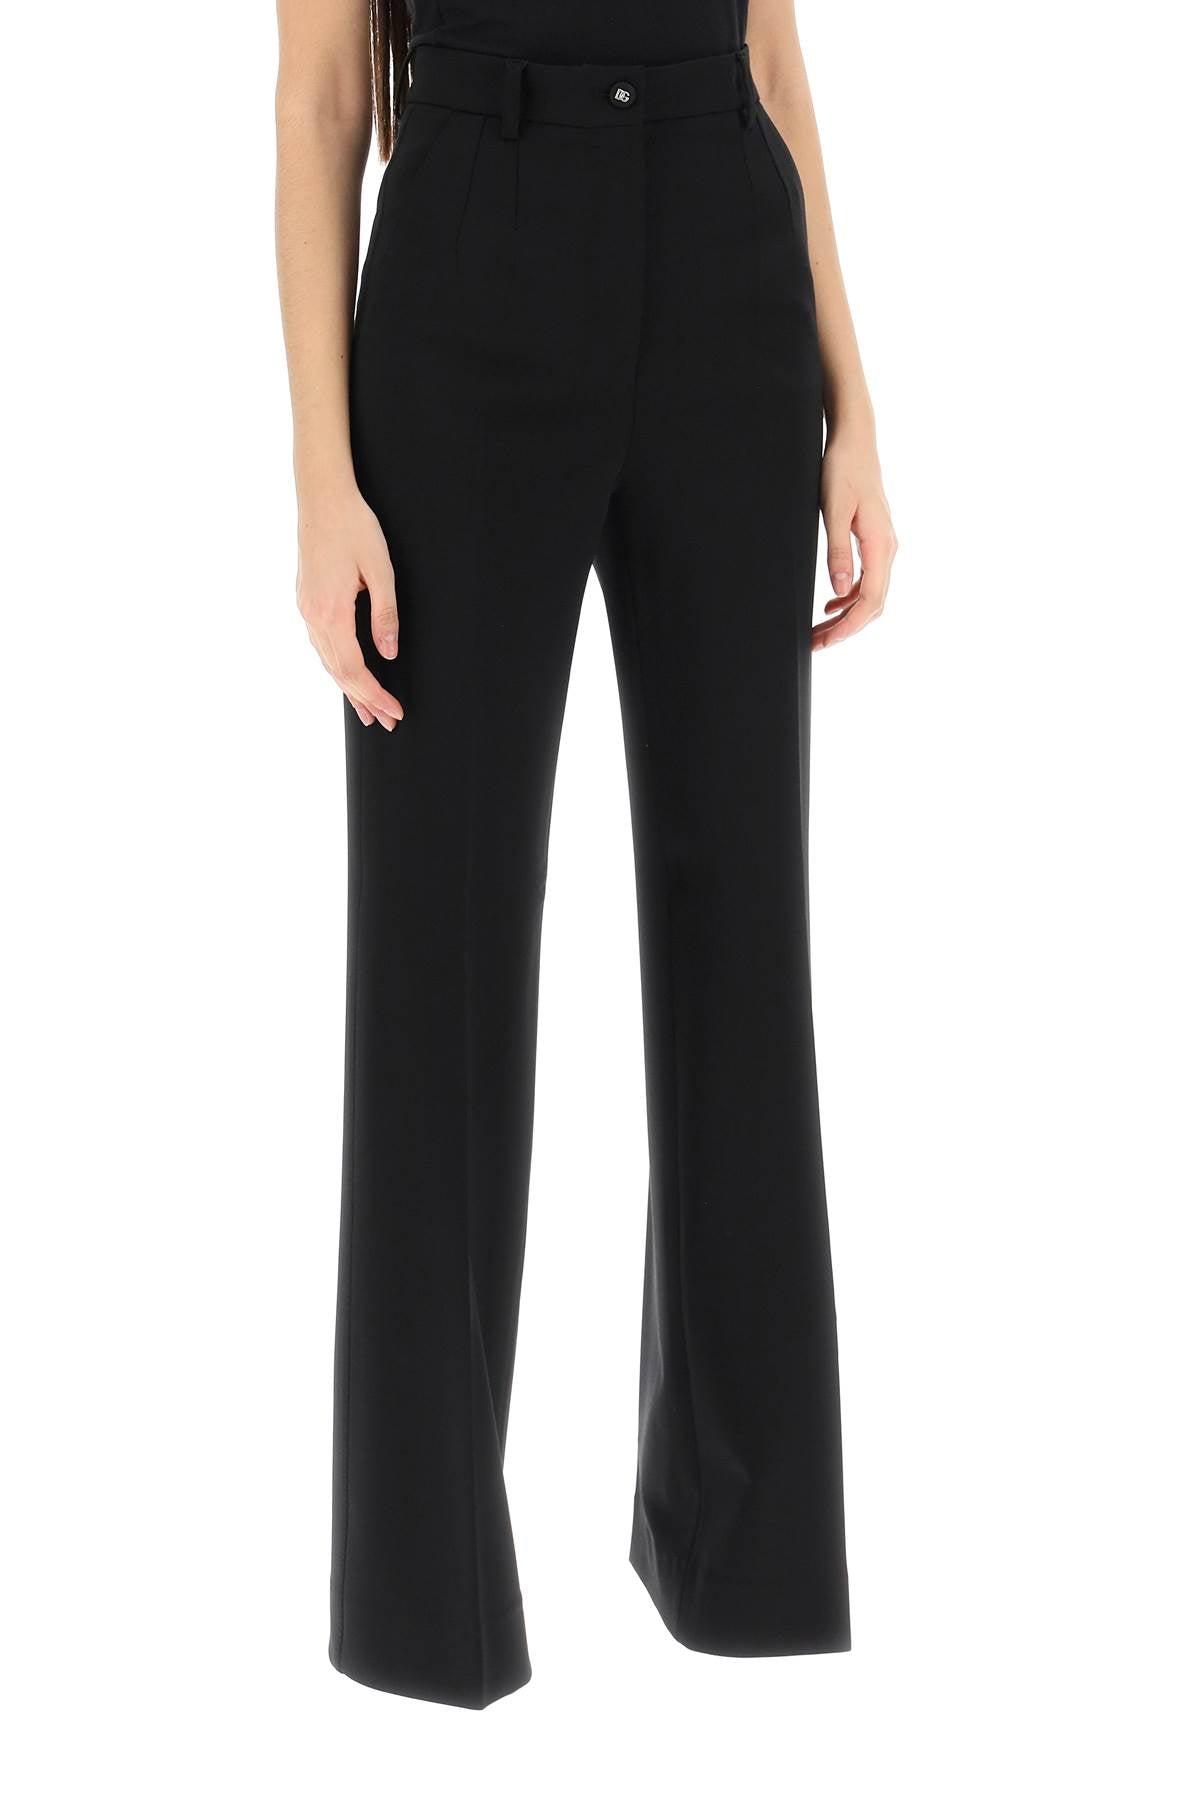 DOLCE & GABBANA Stylish Flared Pants for Women - Milan Stitch with Pressed Crease Detail